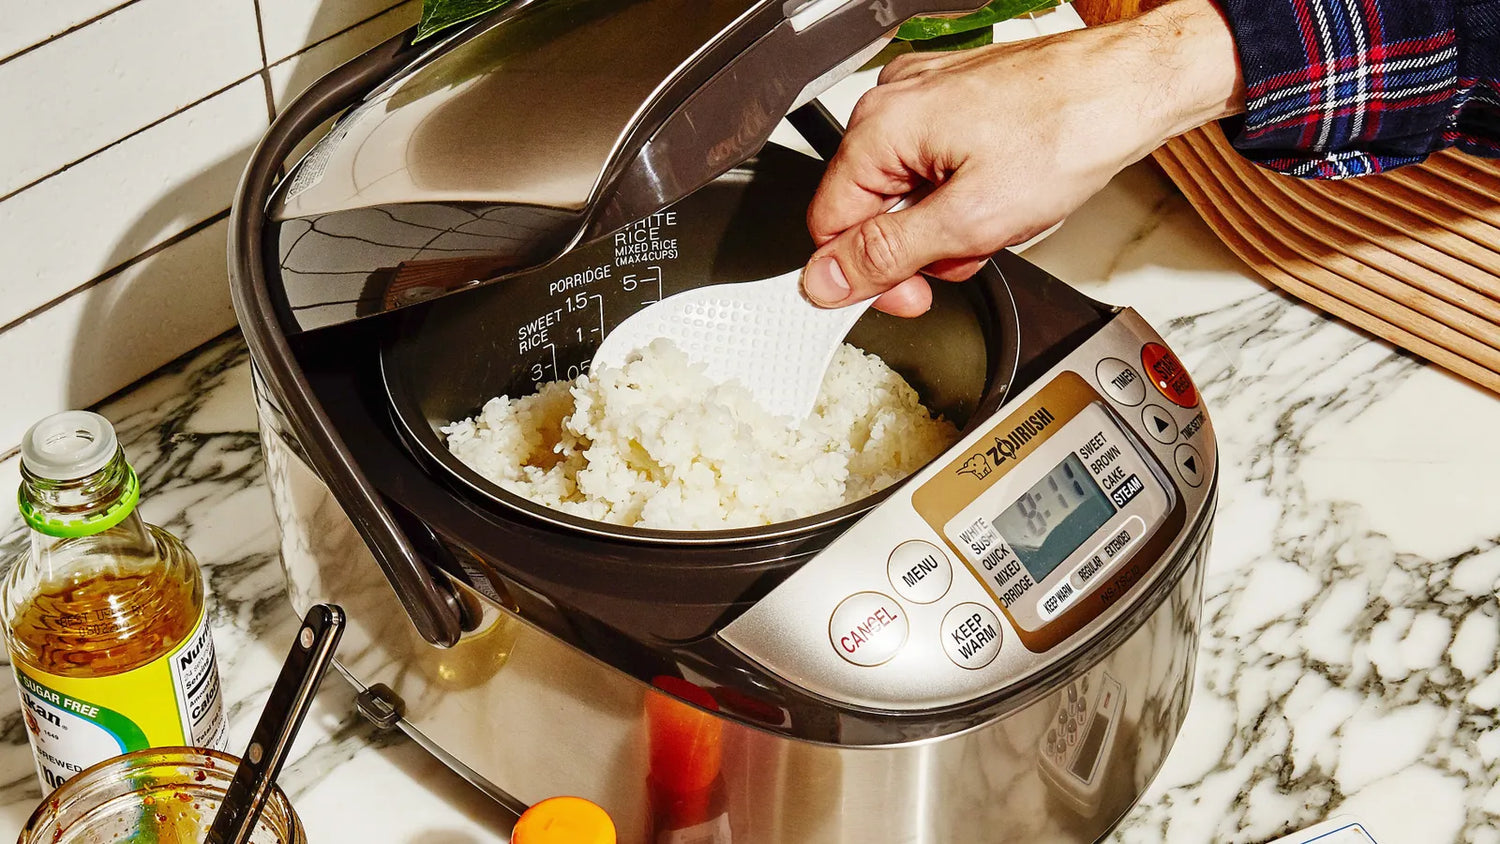 A hand is scooping out cooked white rice from a rice cooker with a paddle.